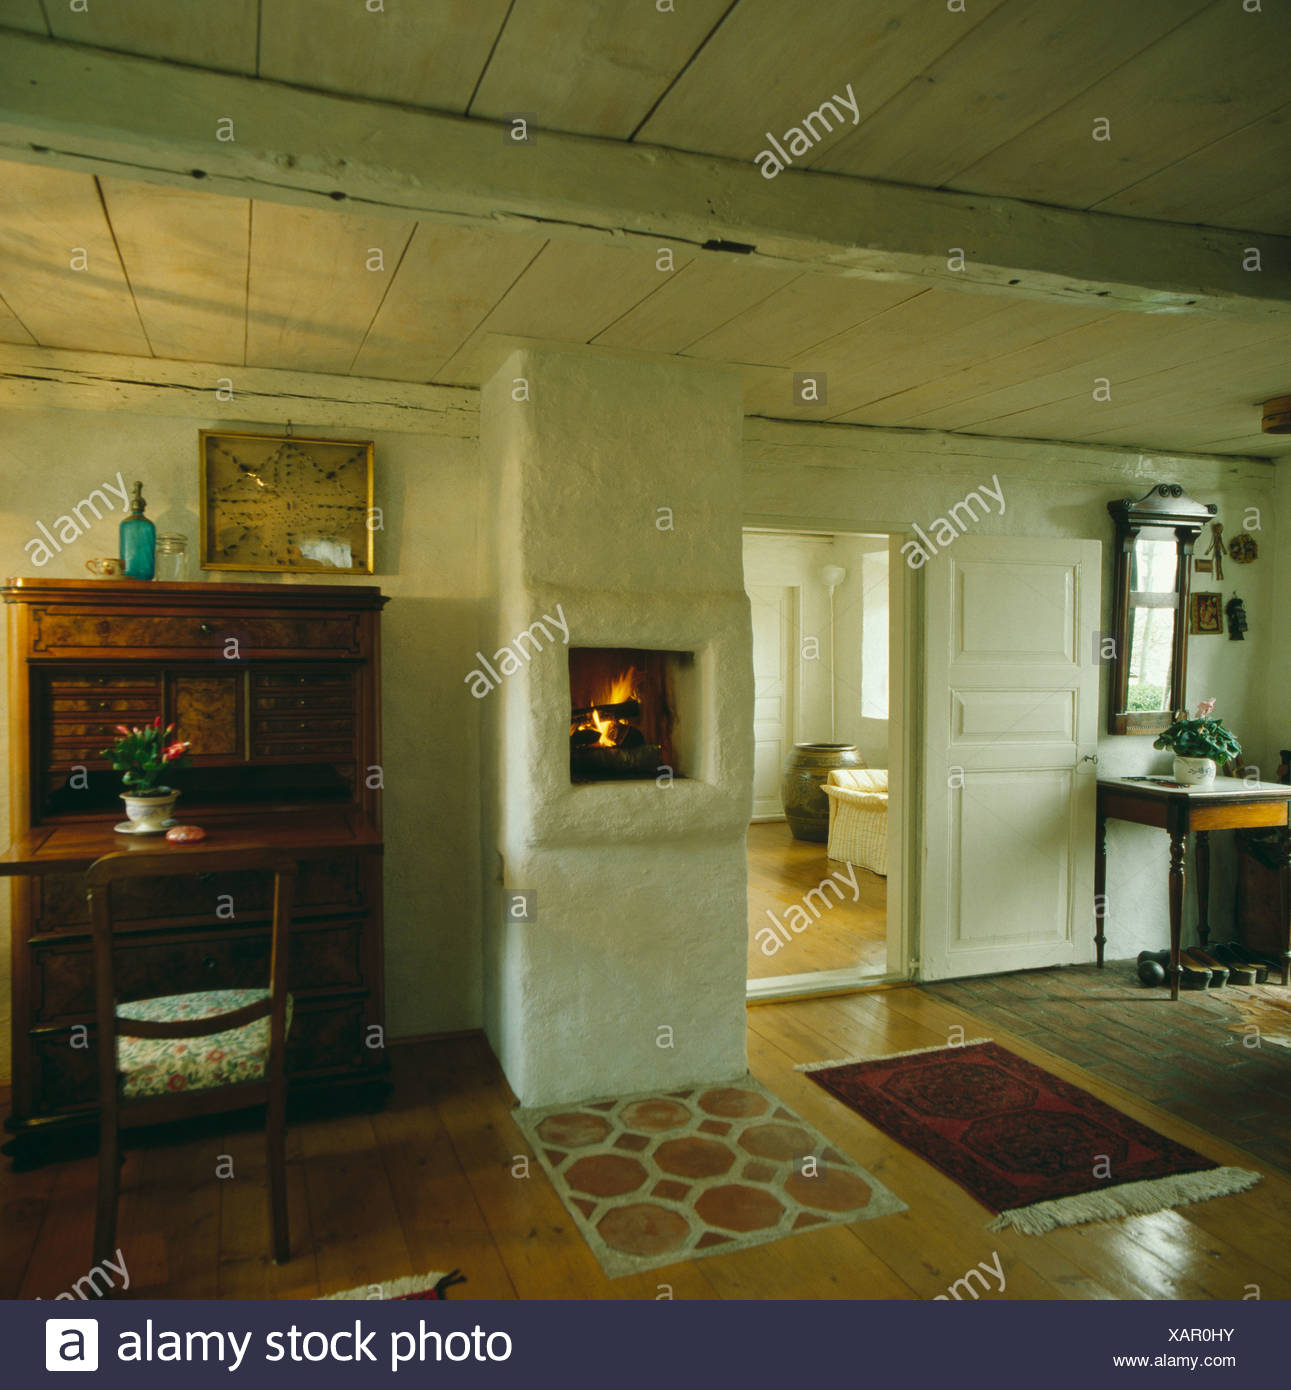 Antique Desk And Wall Mounted Fireplace In Swedish Cottage Hall